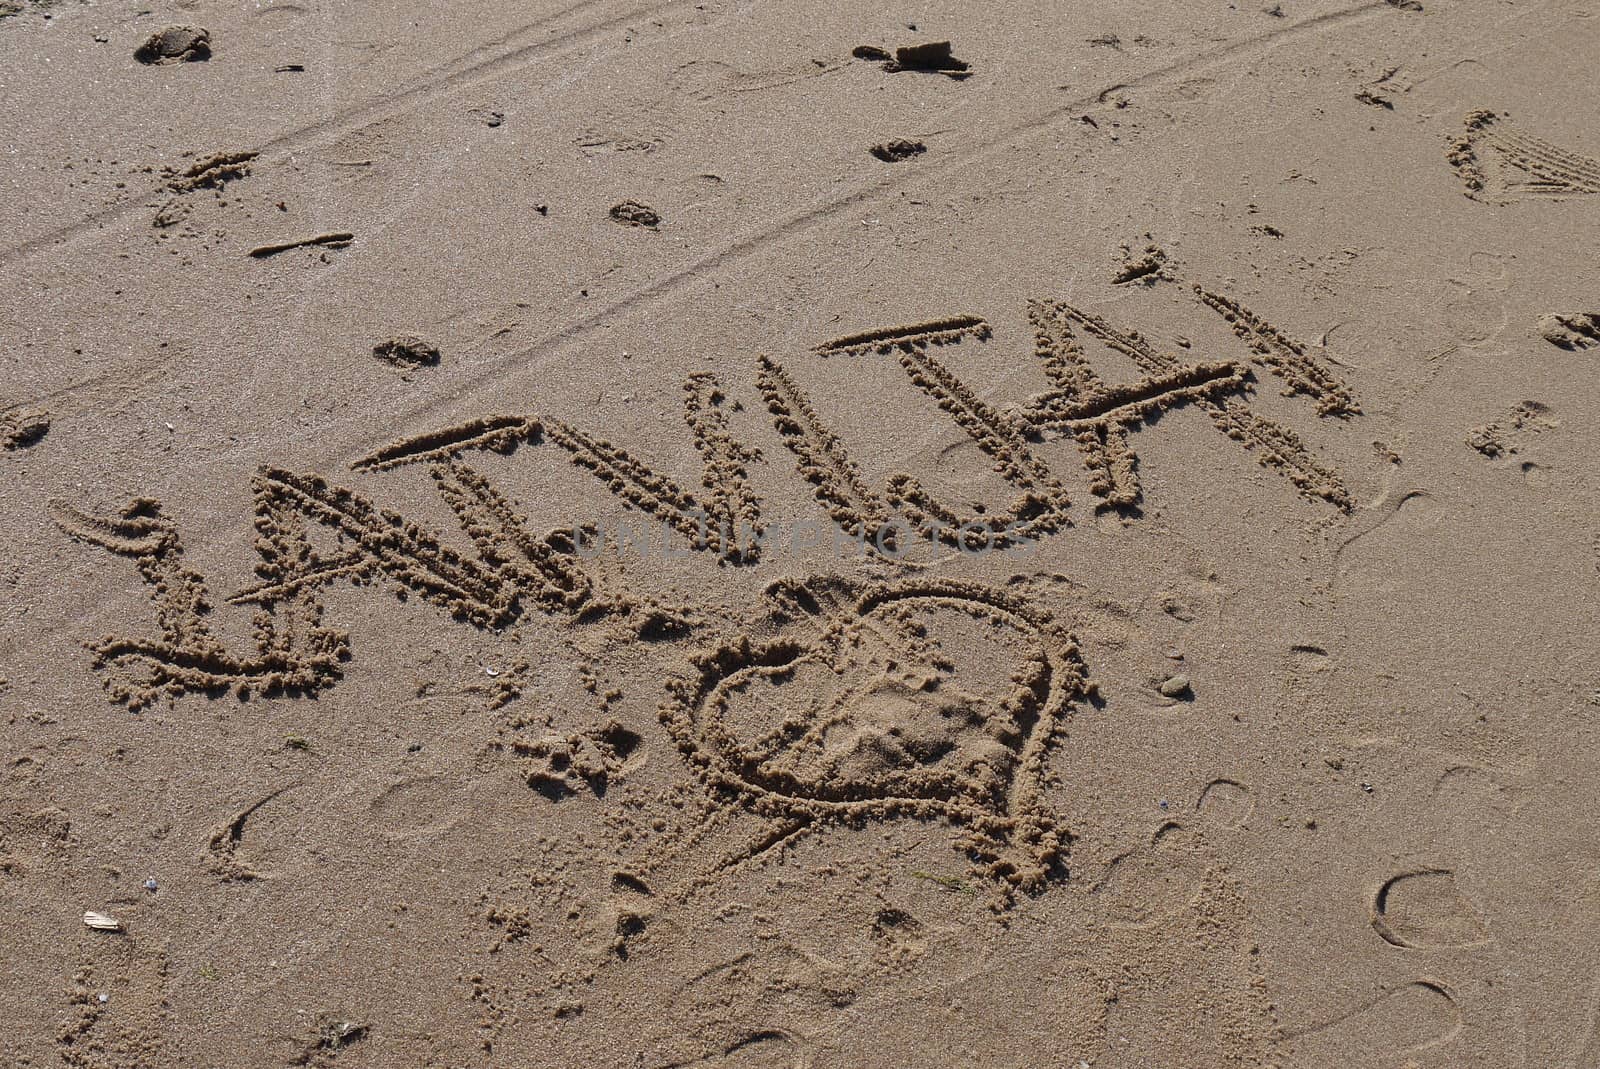 From Latvia with love, writing on the sand